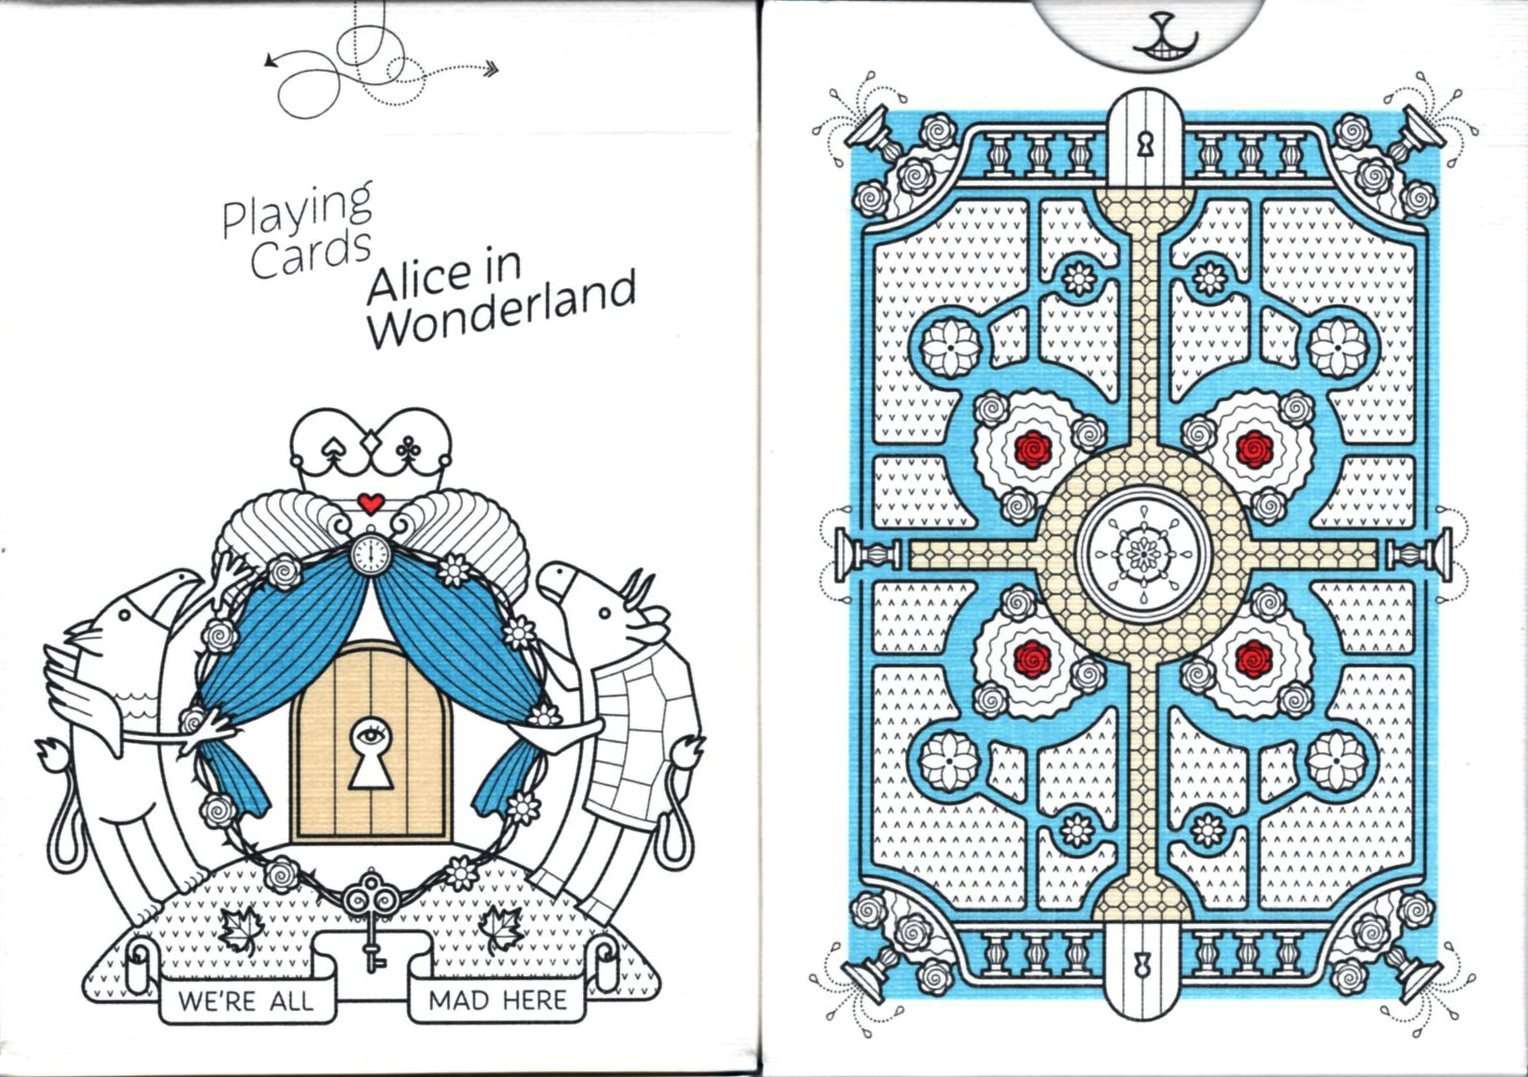 Alice in wonderland playing cards uspcc